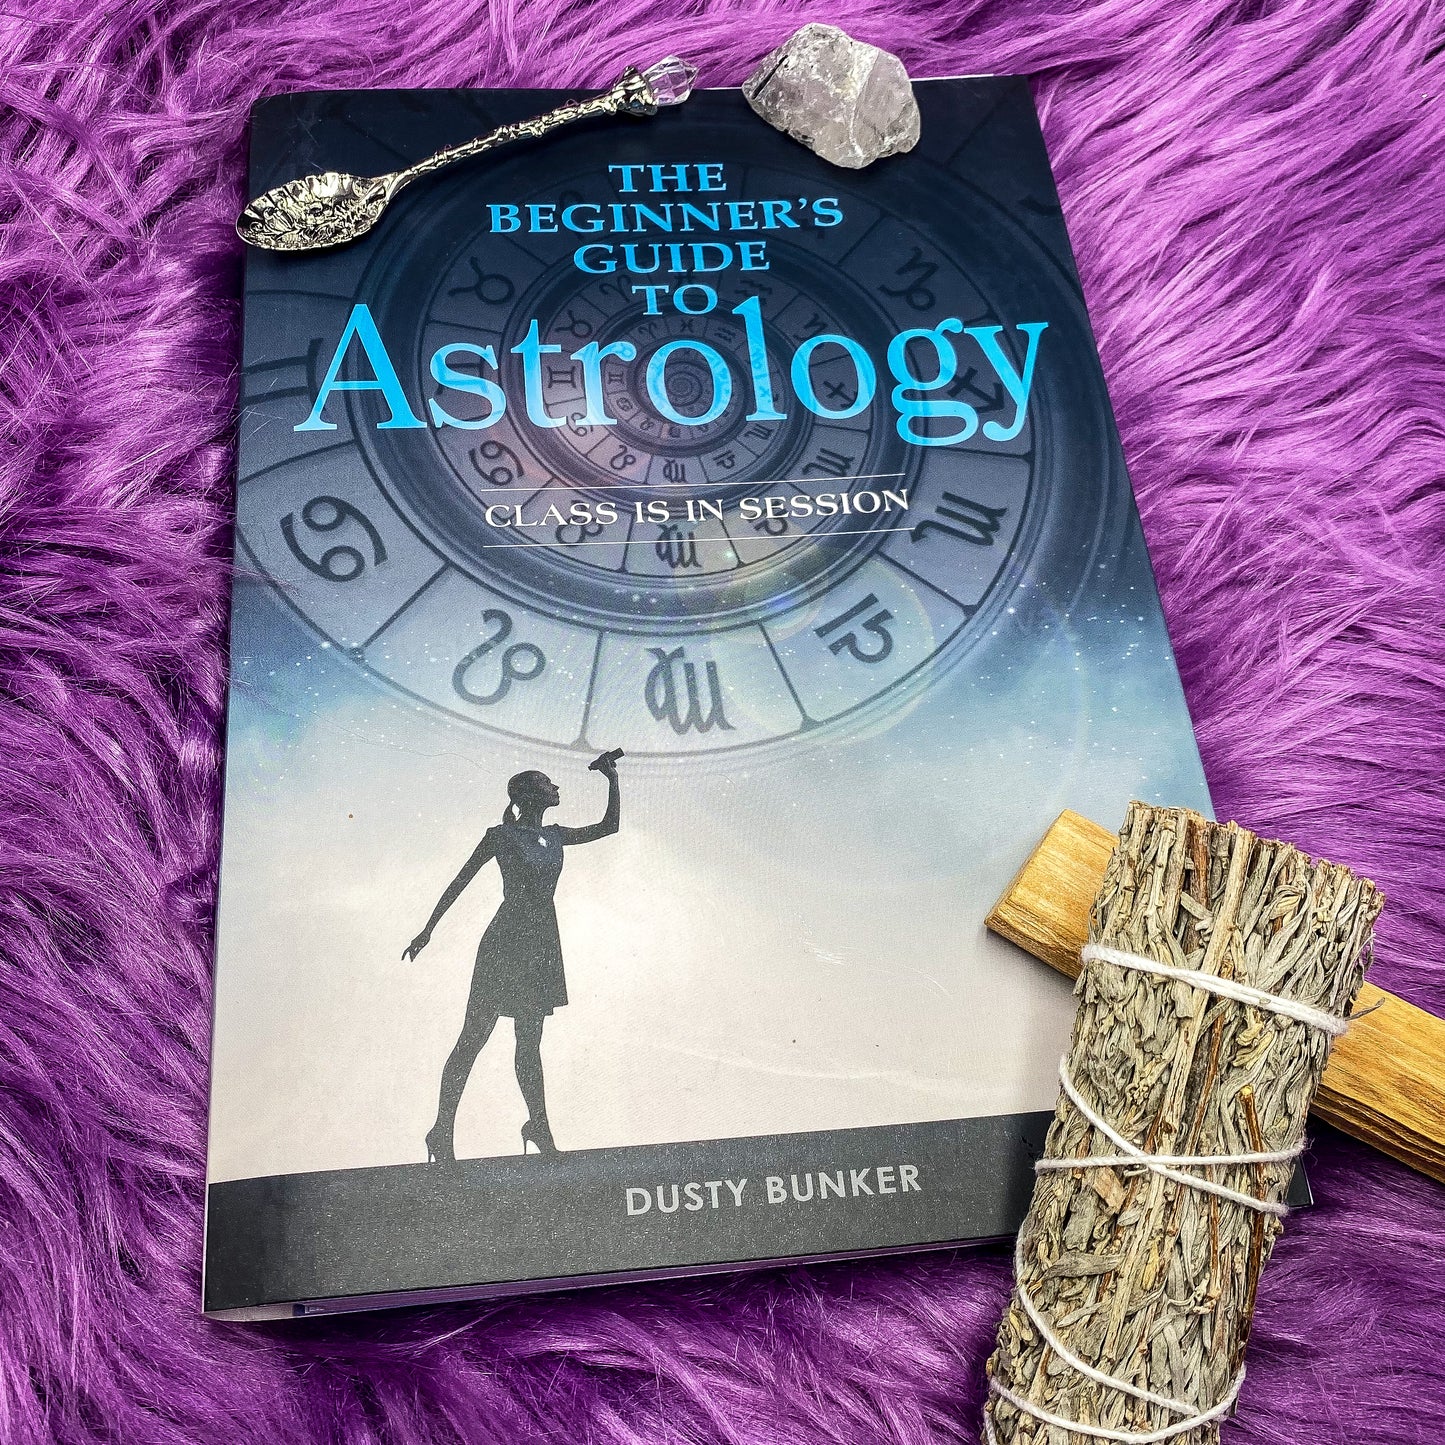 The Beginner's Guide to Astrology: Class Is in Session by Dusty Bunker